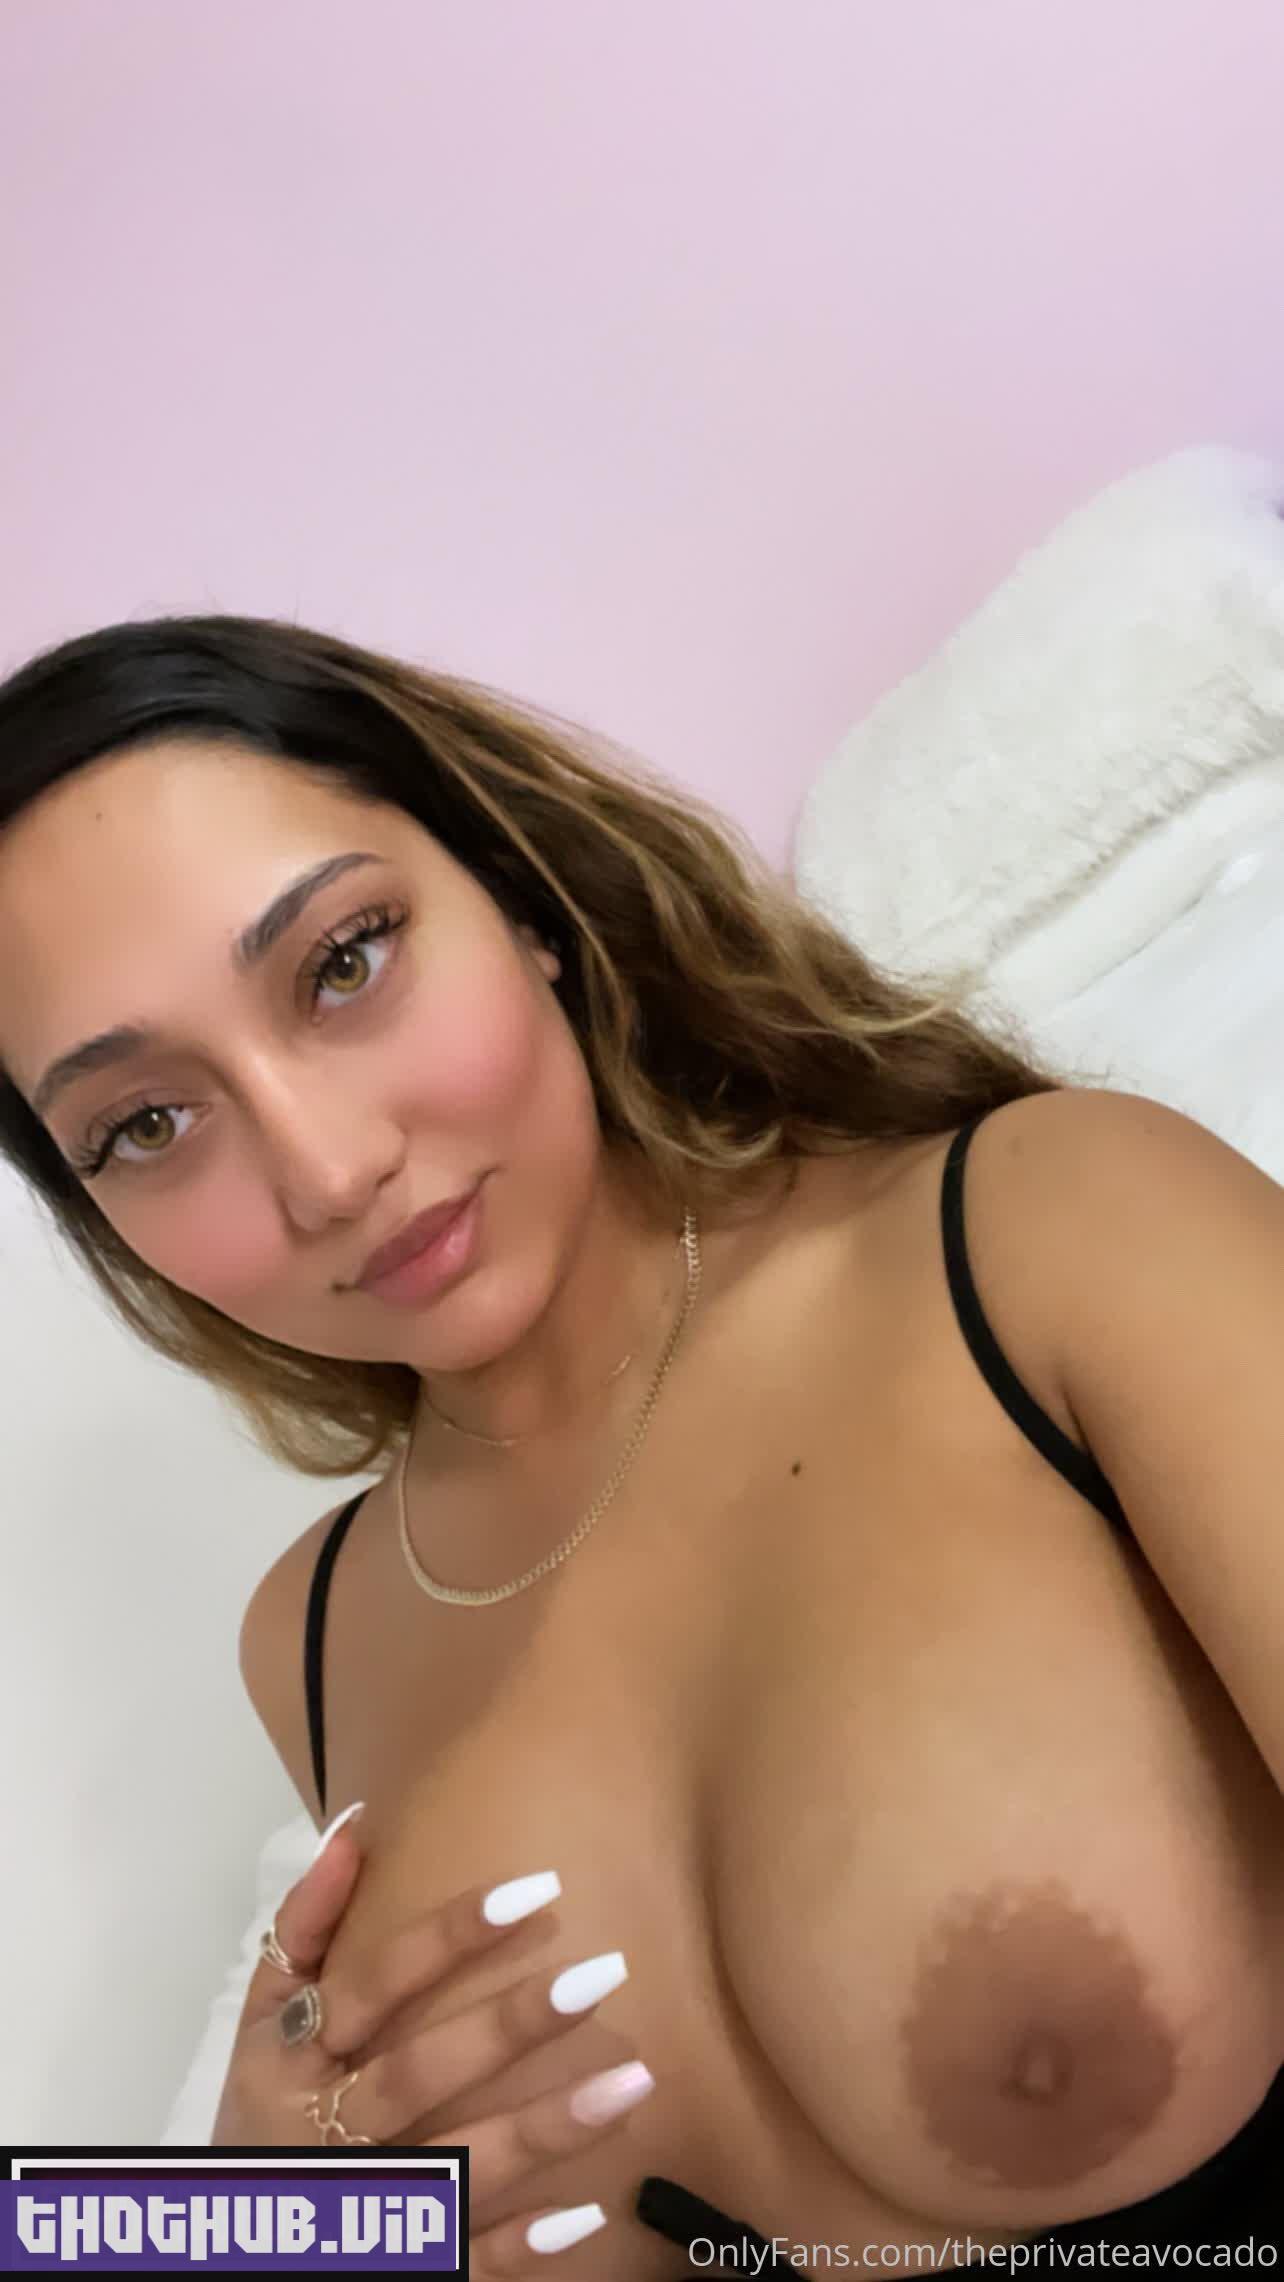 1688545068 982 Theprivateavocado %E2%80%93 Busty Latina Onlyfans Nudes